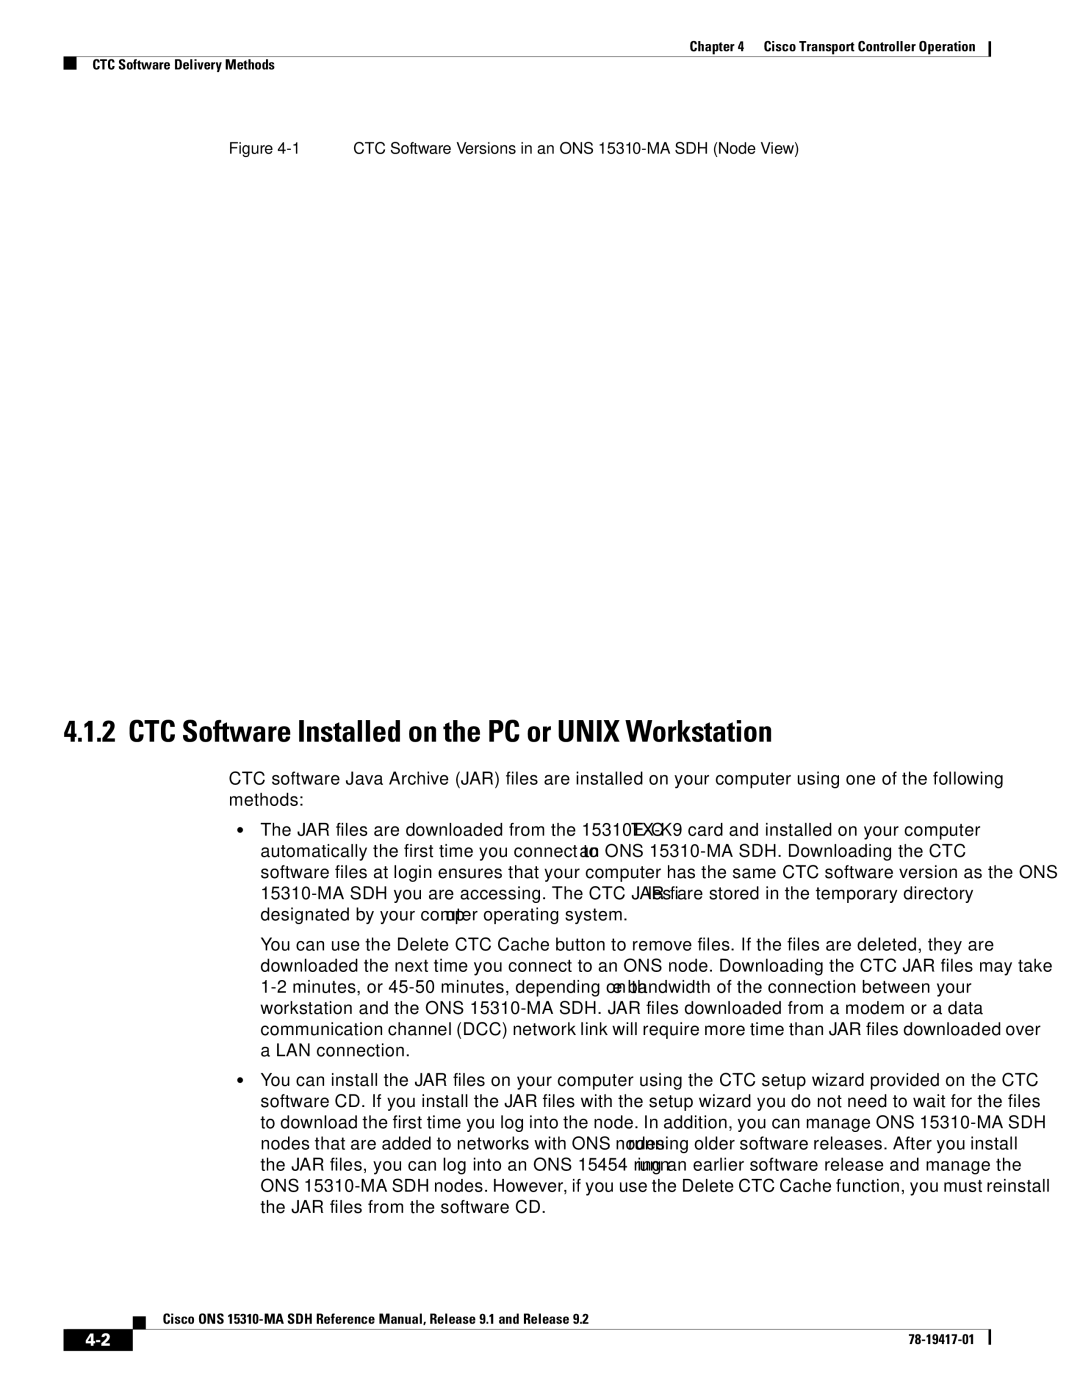 Cisco Systems 15310-MA manual CTC Software Installed on the PC or Unix Workstation 